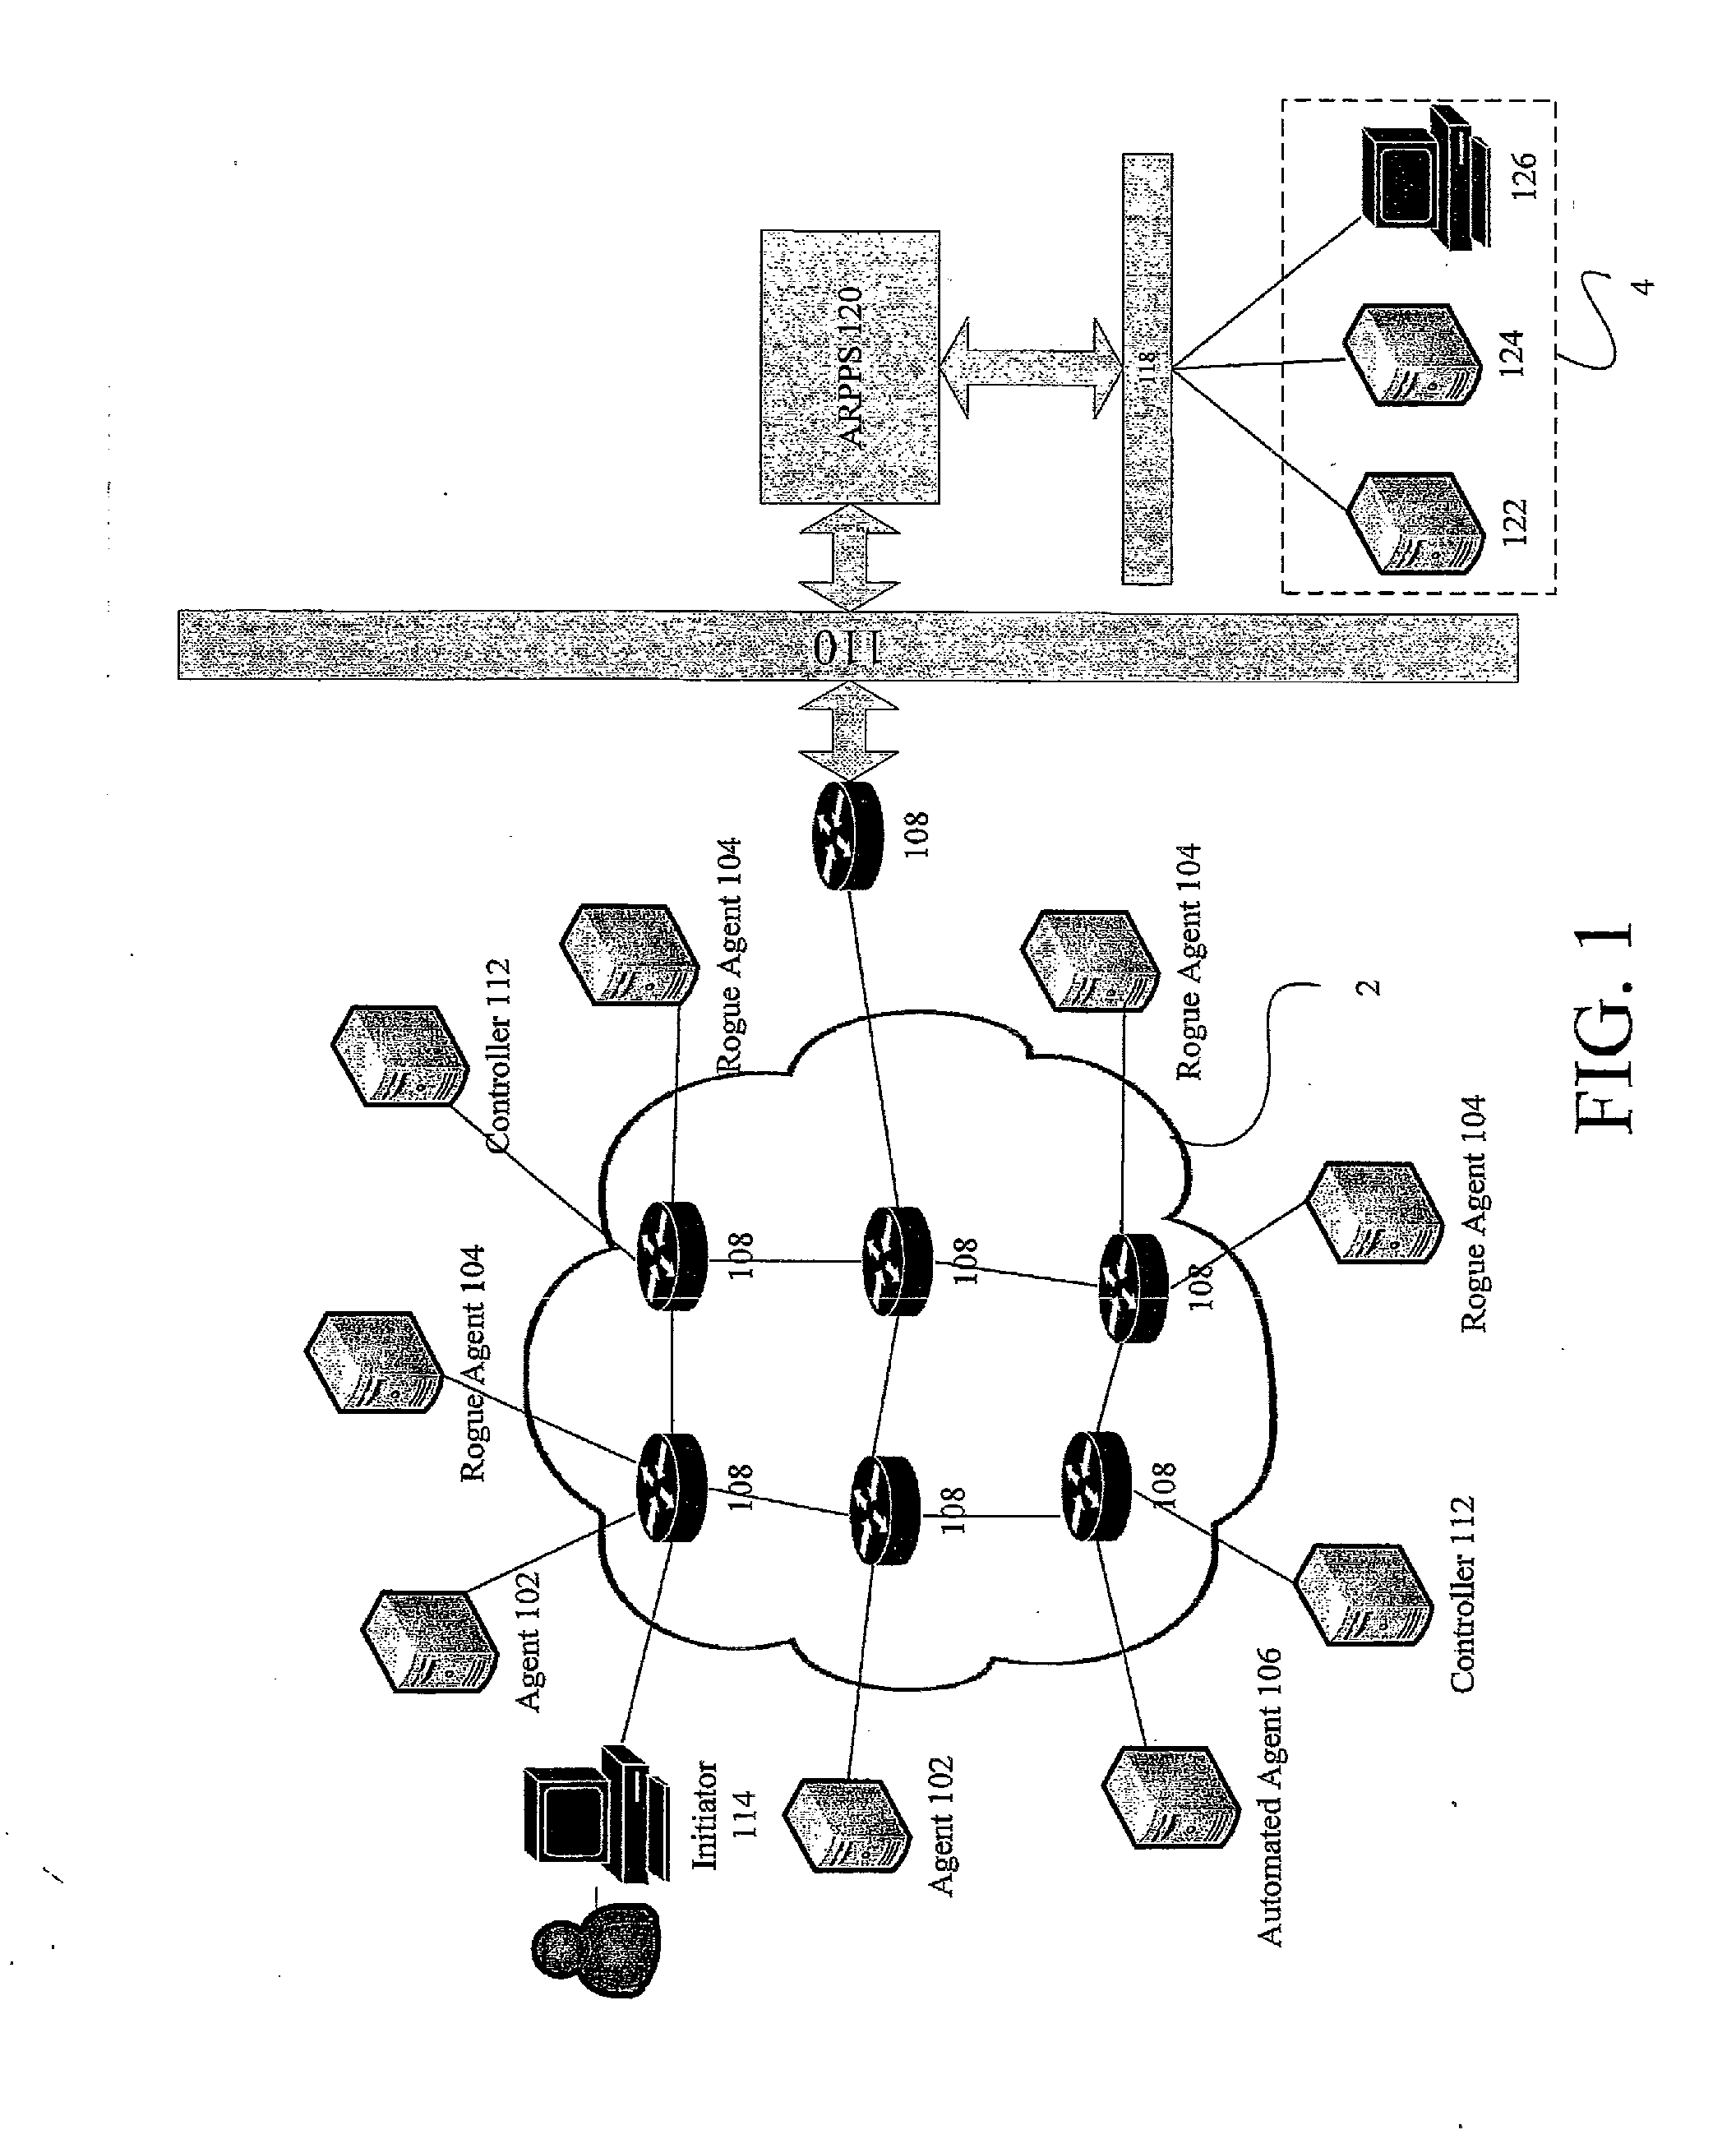 System and Method of Active Remediation and Passive Protection Against Cyber Attacks